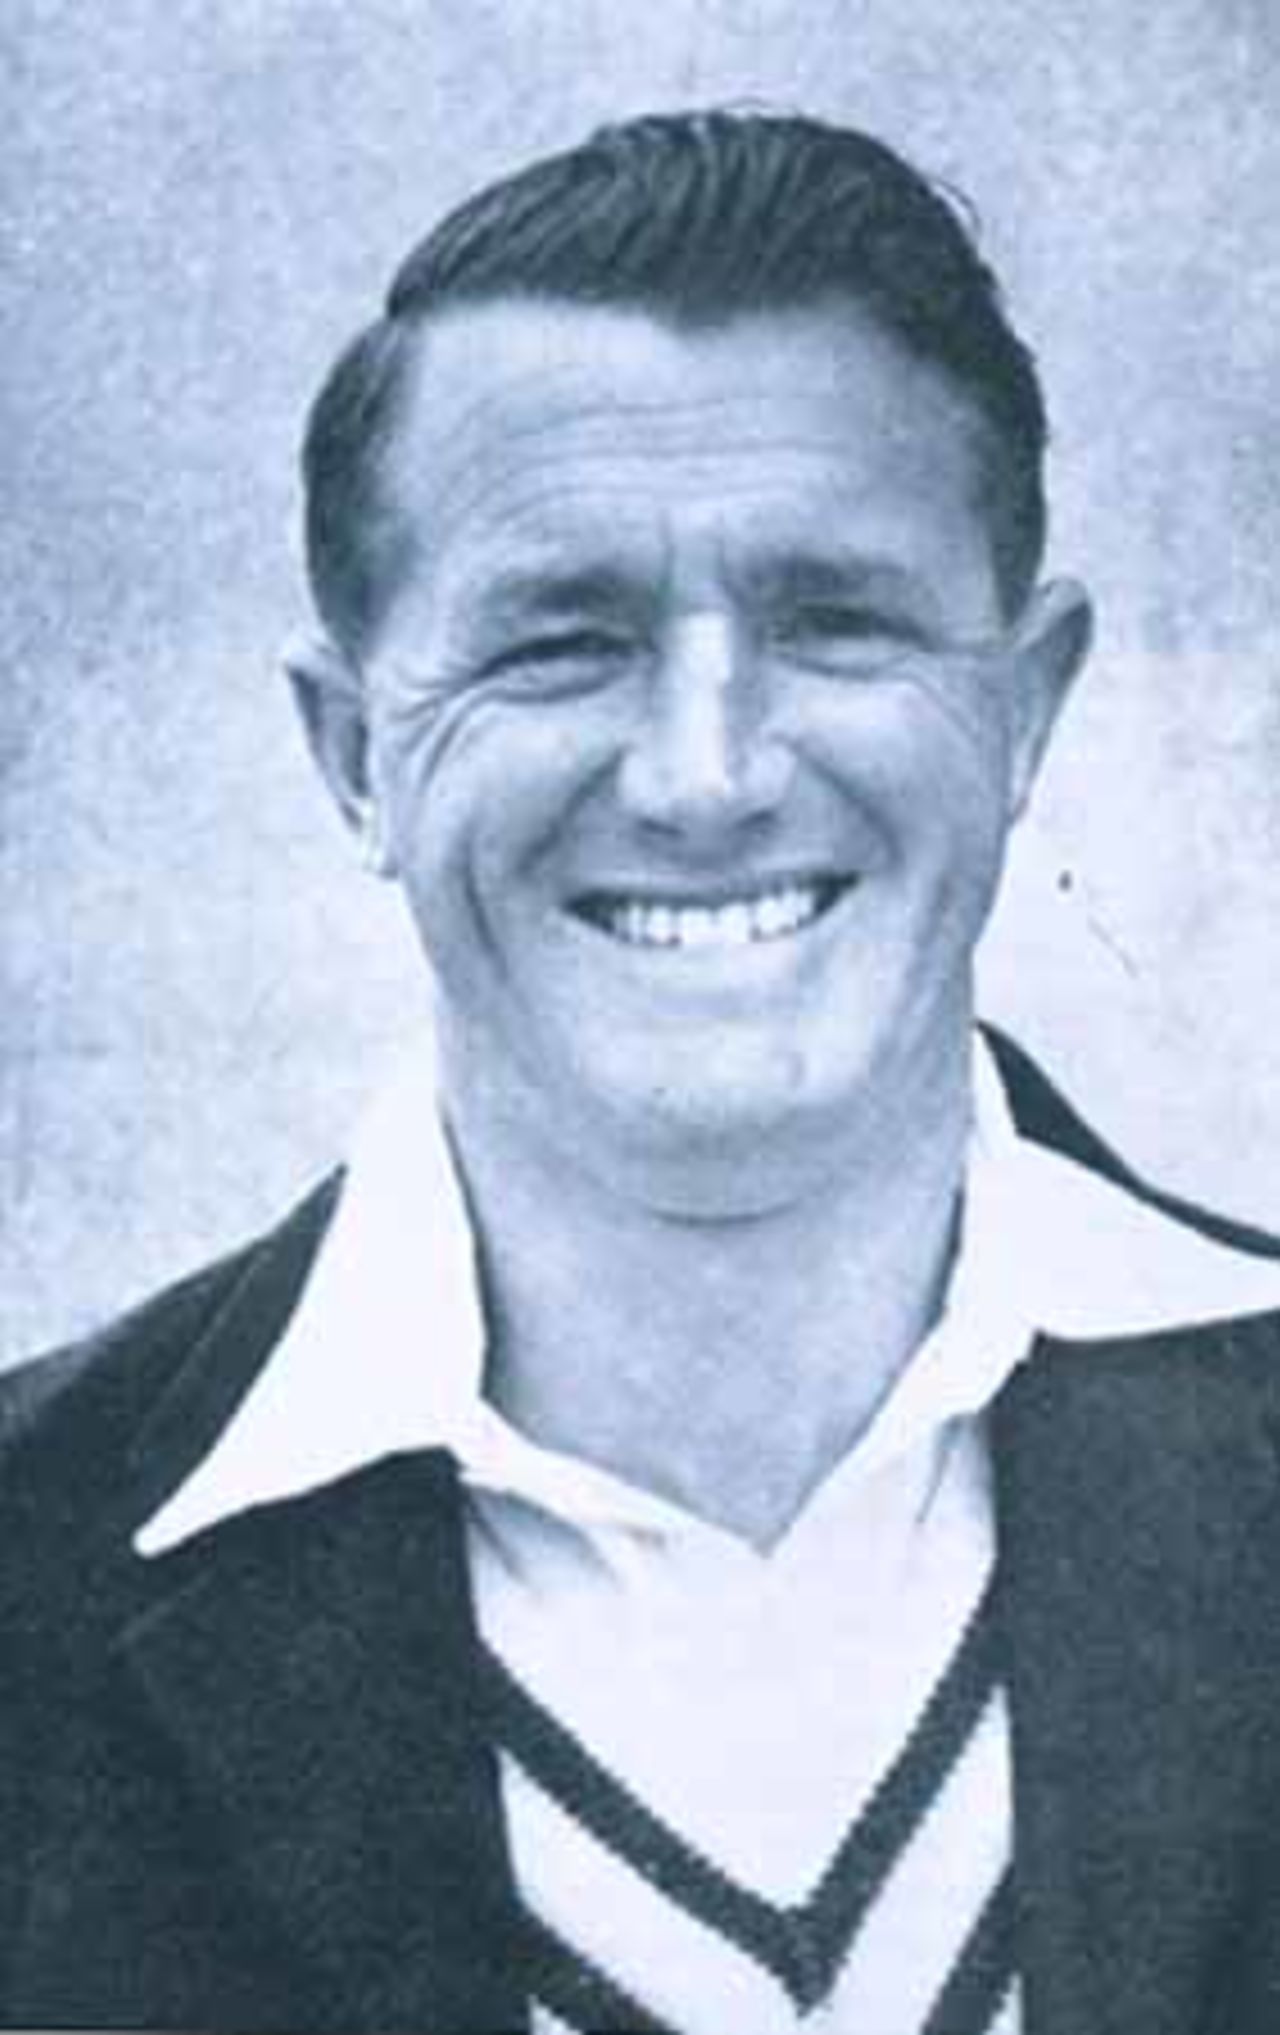 Neville Rogers, Hampshire Cricketer 1946-1955